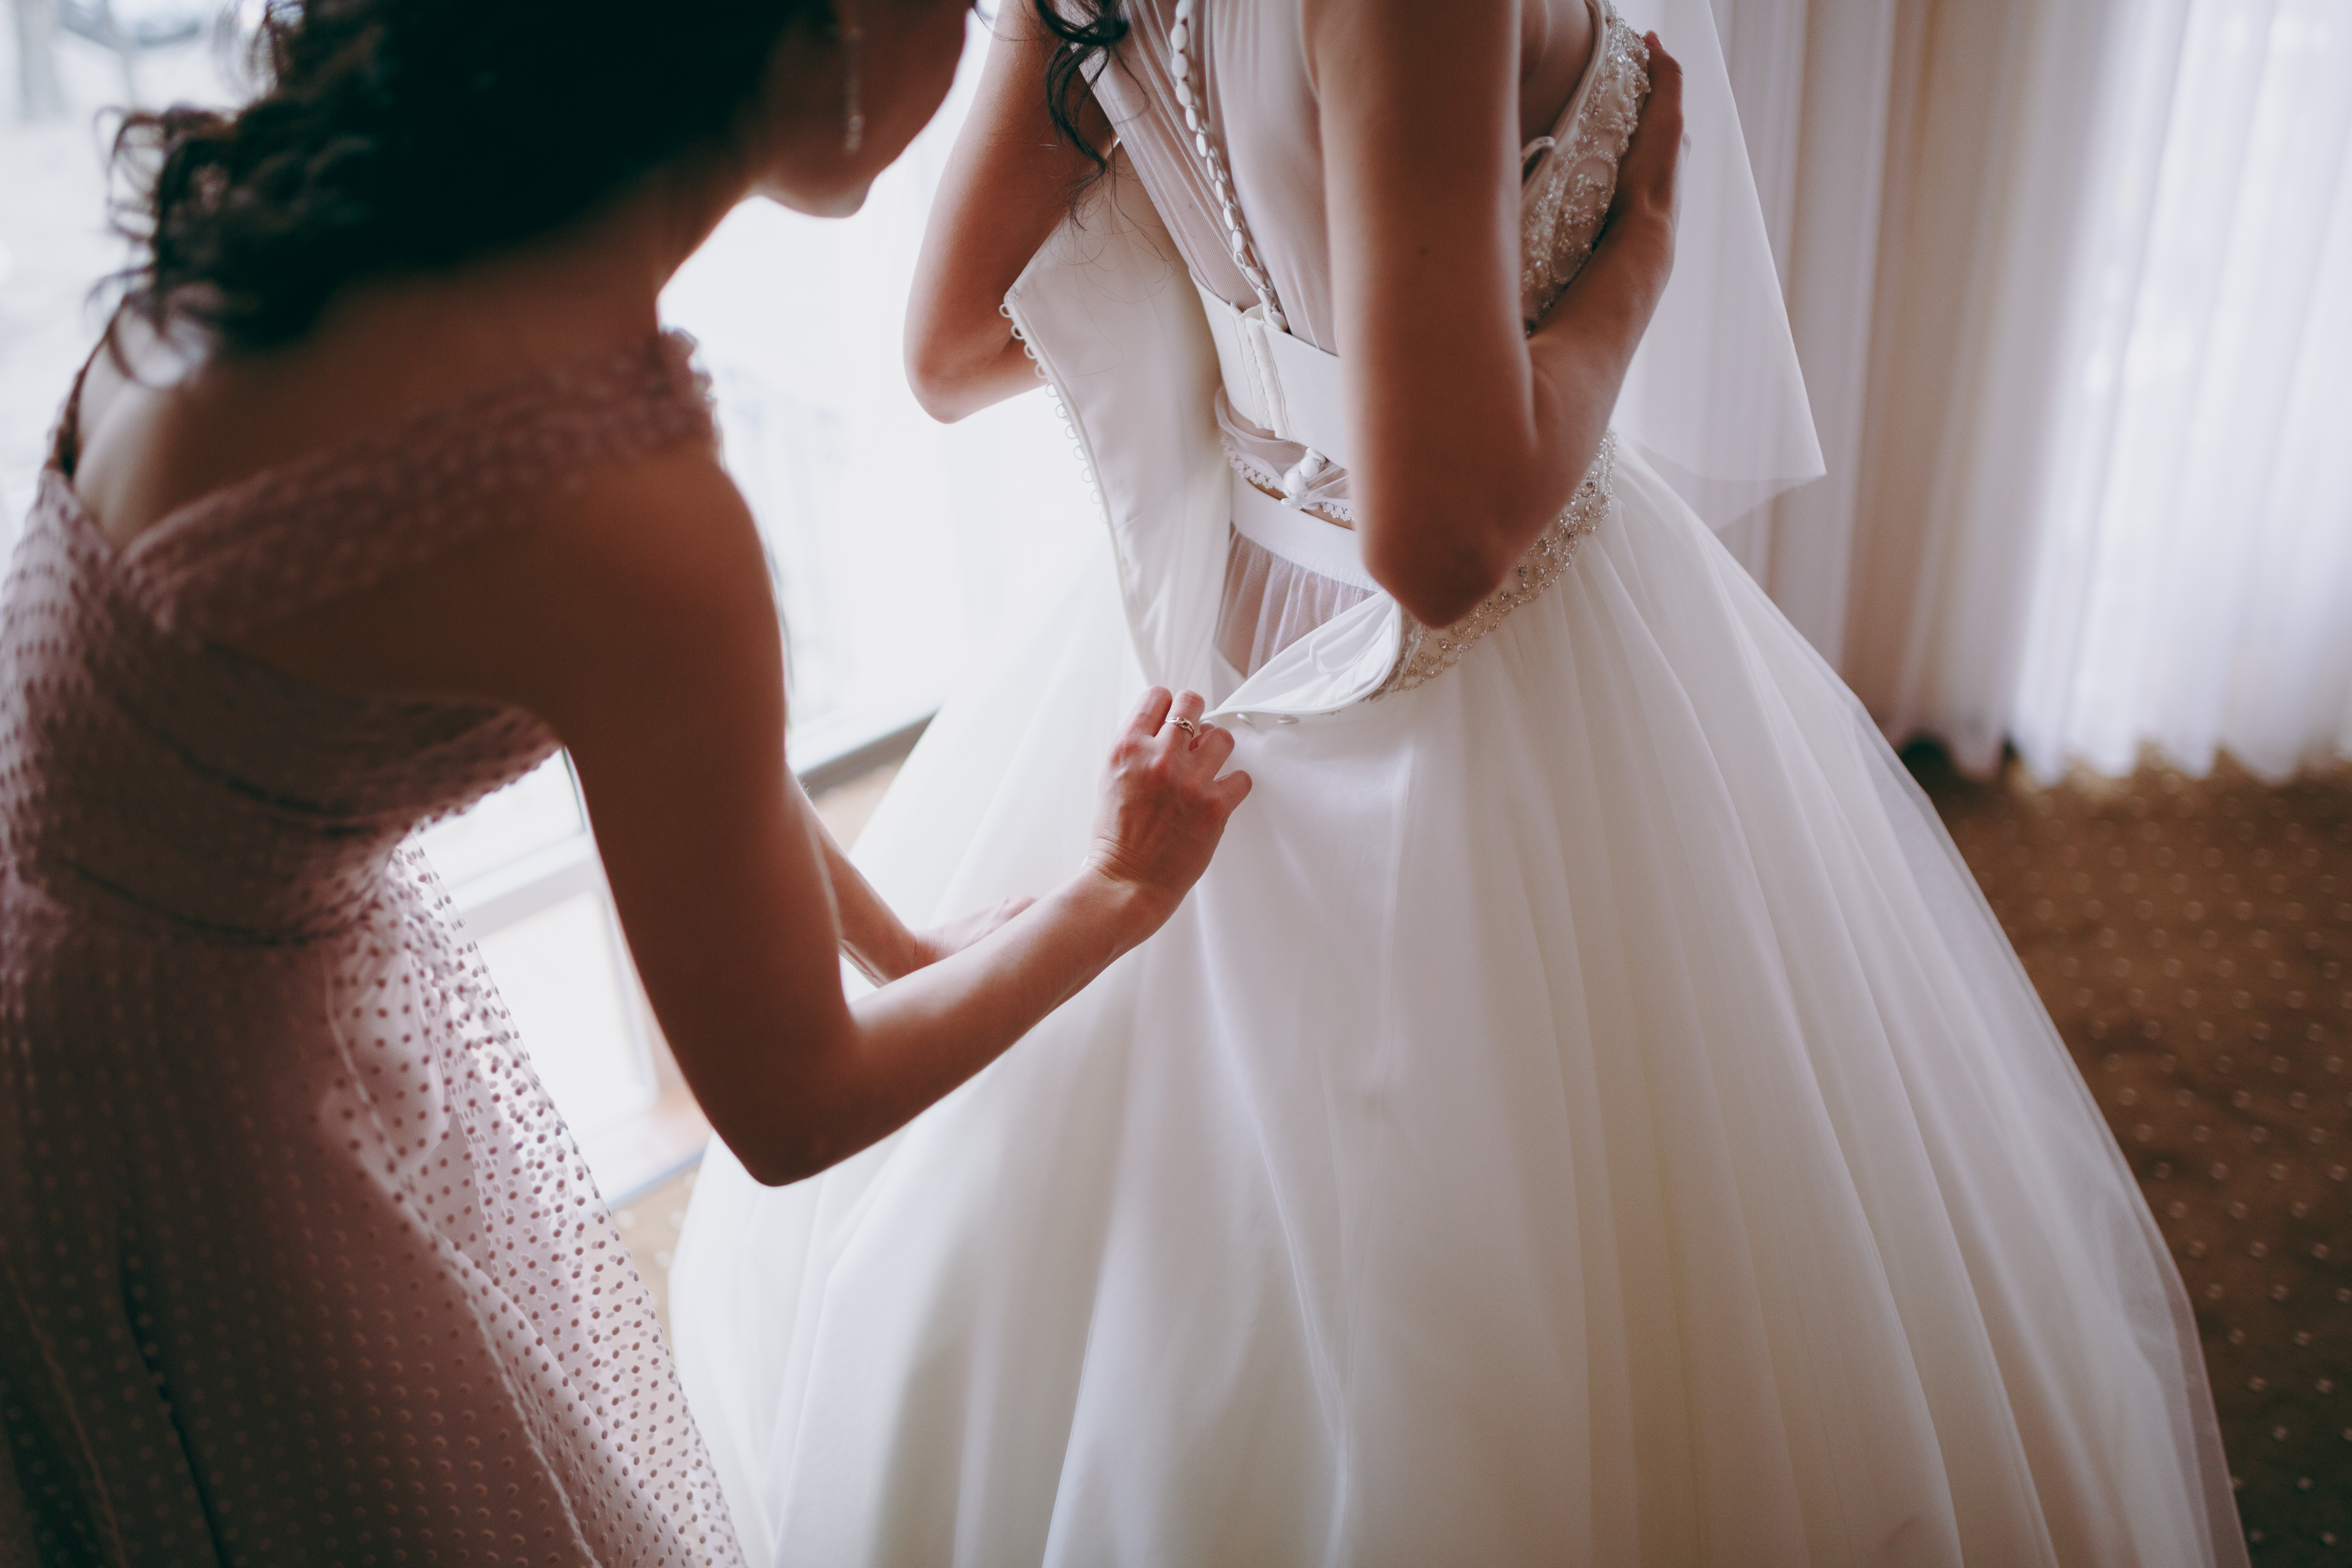 Maid of honor helping the bride into her dress. | Source: Shutterstock